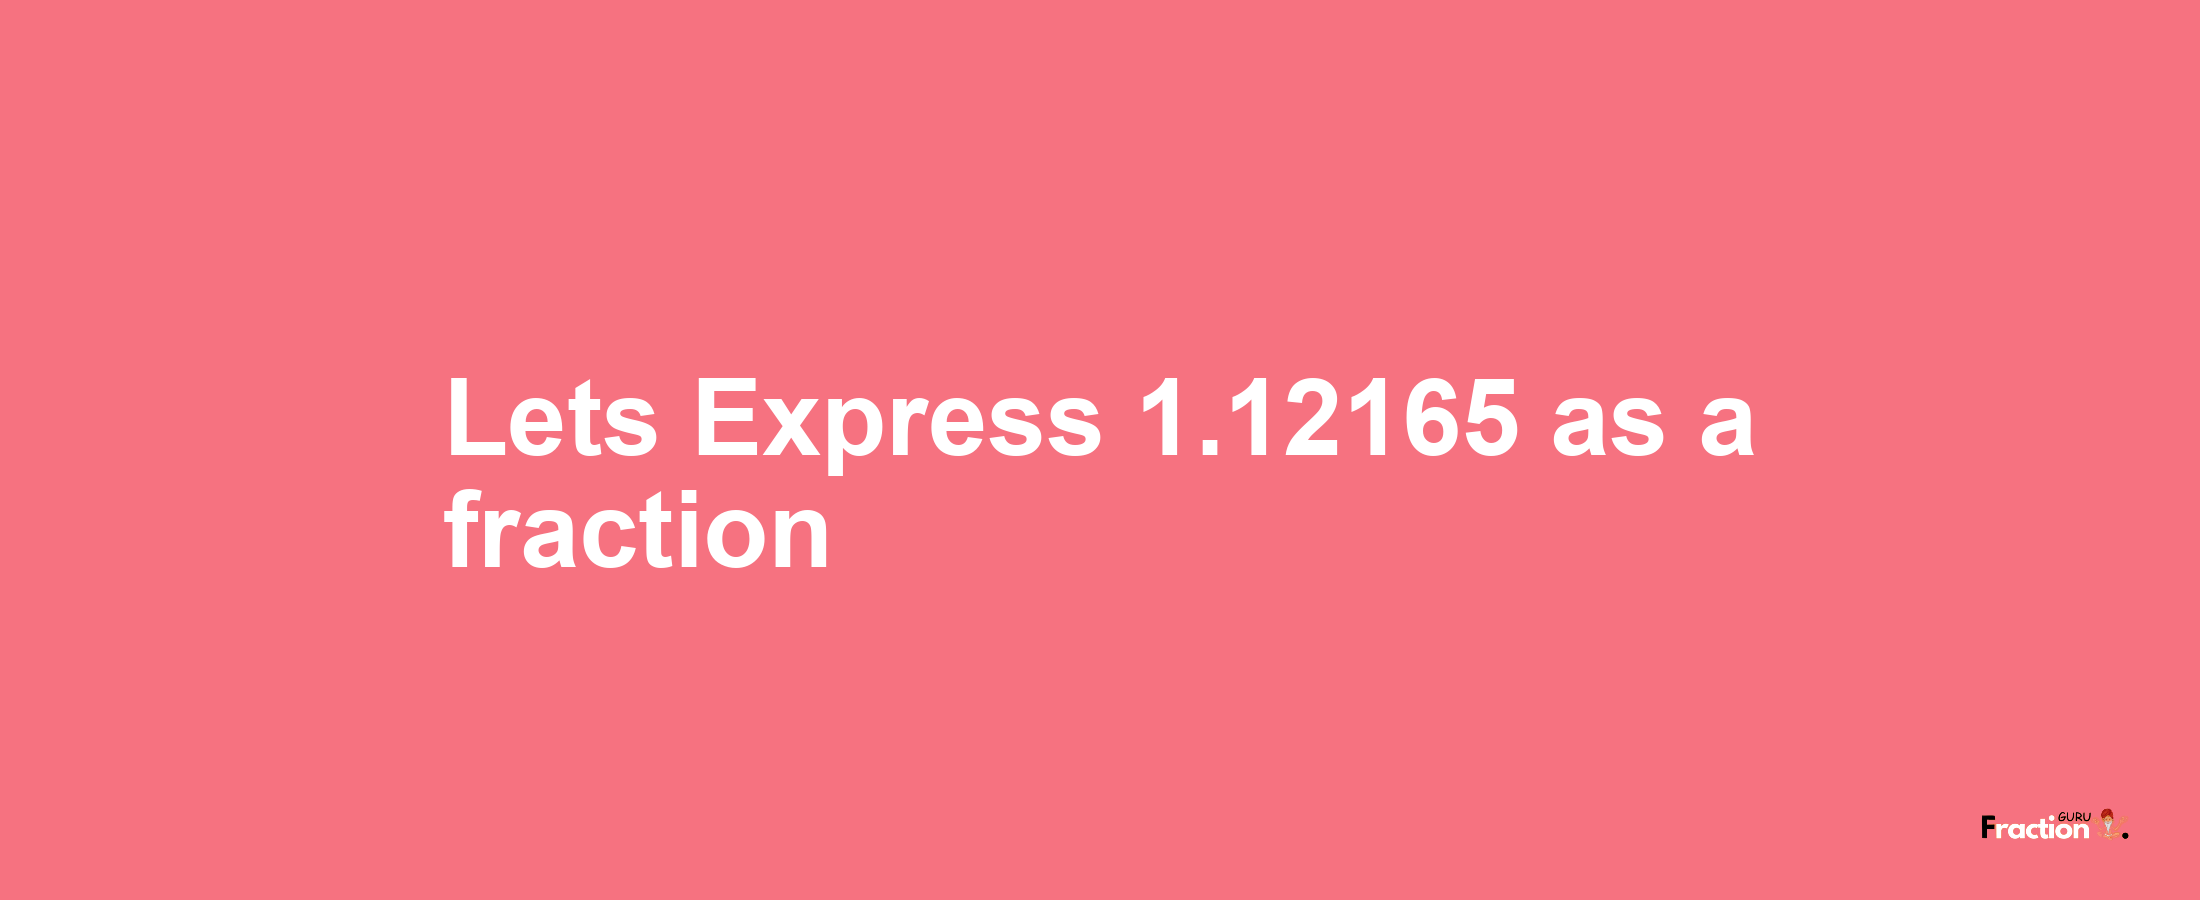 Lets Express 1.12165 as afraction